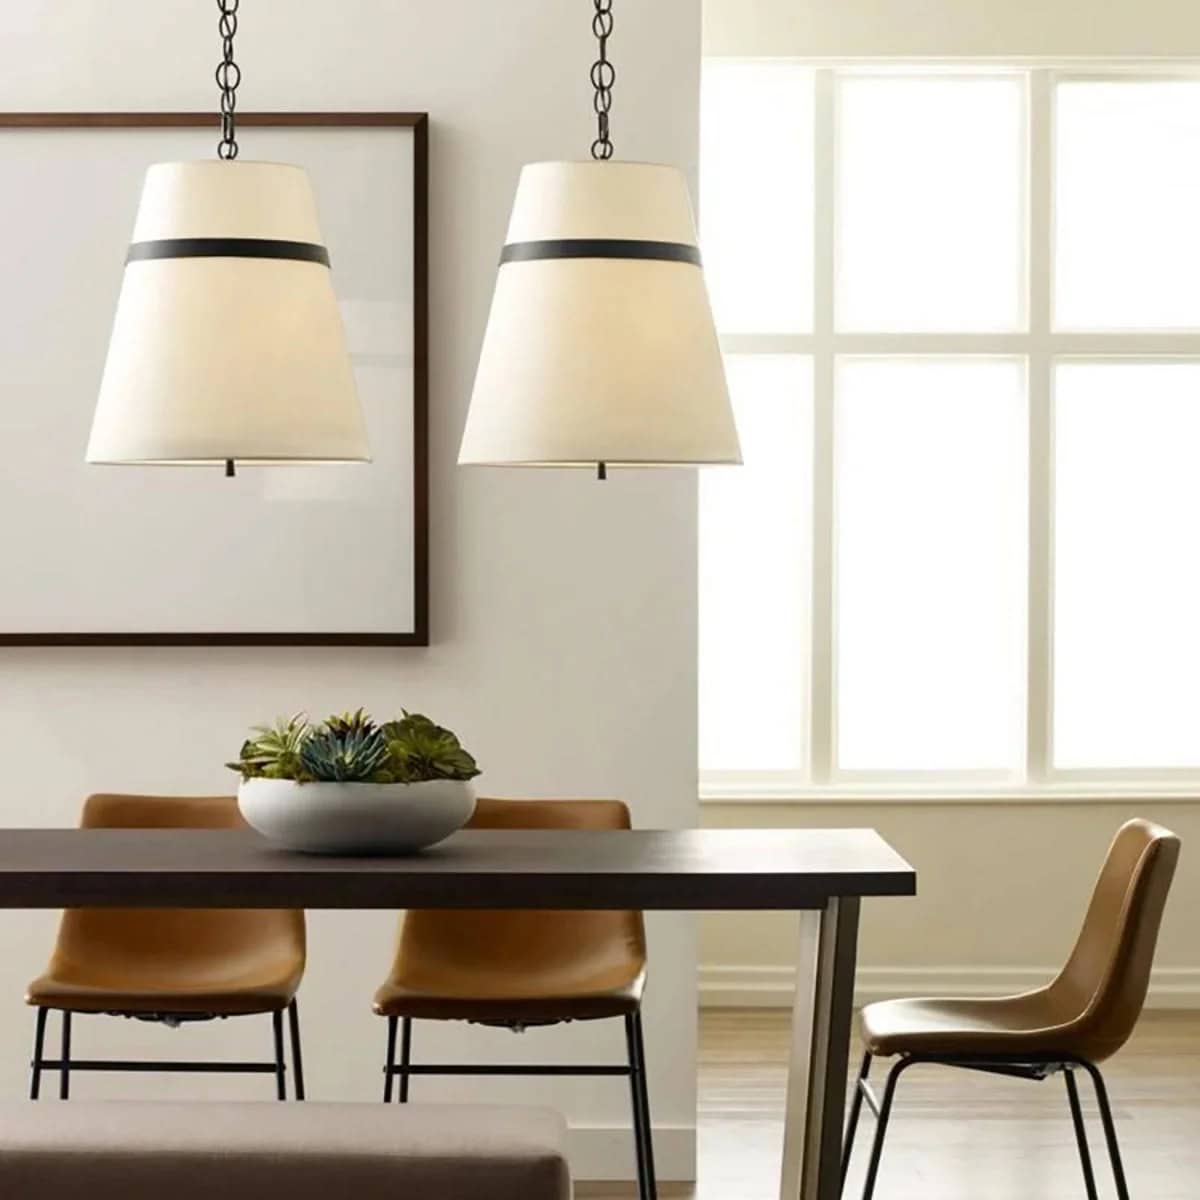 Cordtlandt black pendants with linen shades over a dining table